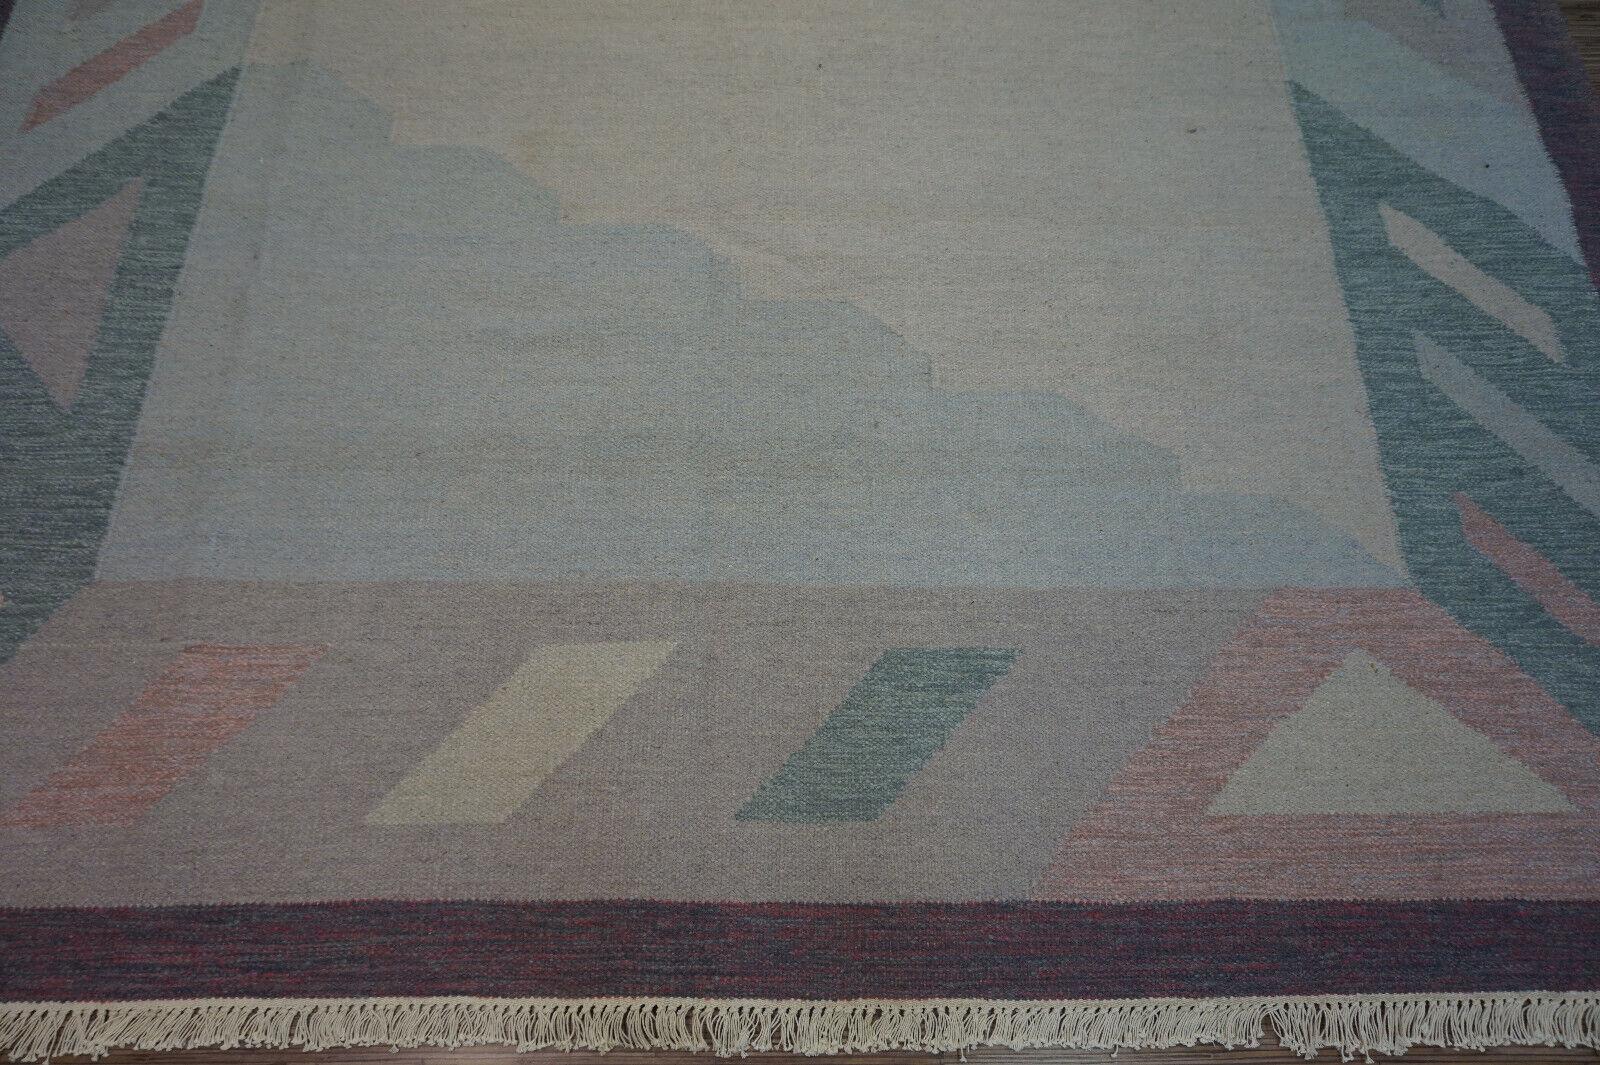 Late 20th Century Handmade Vintage Indian Dhurrie Kilim Rug 8.4' x 9.6', 1970s - 1D44 For Sale